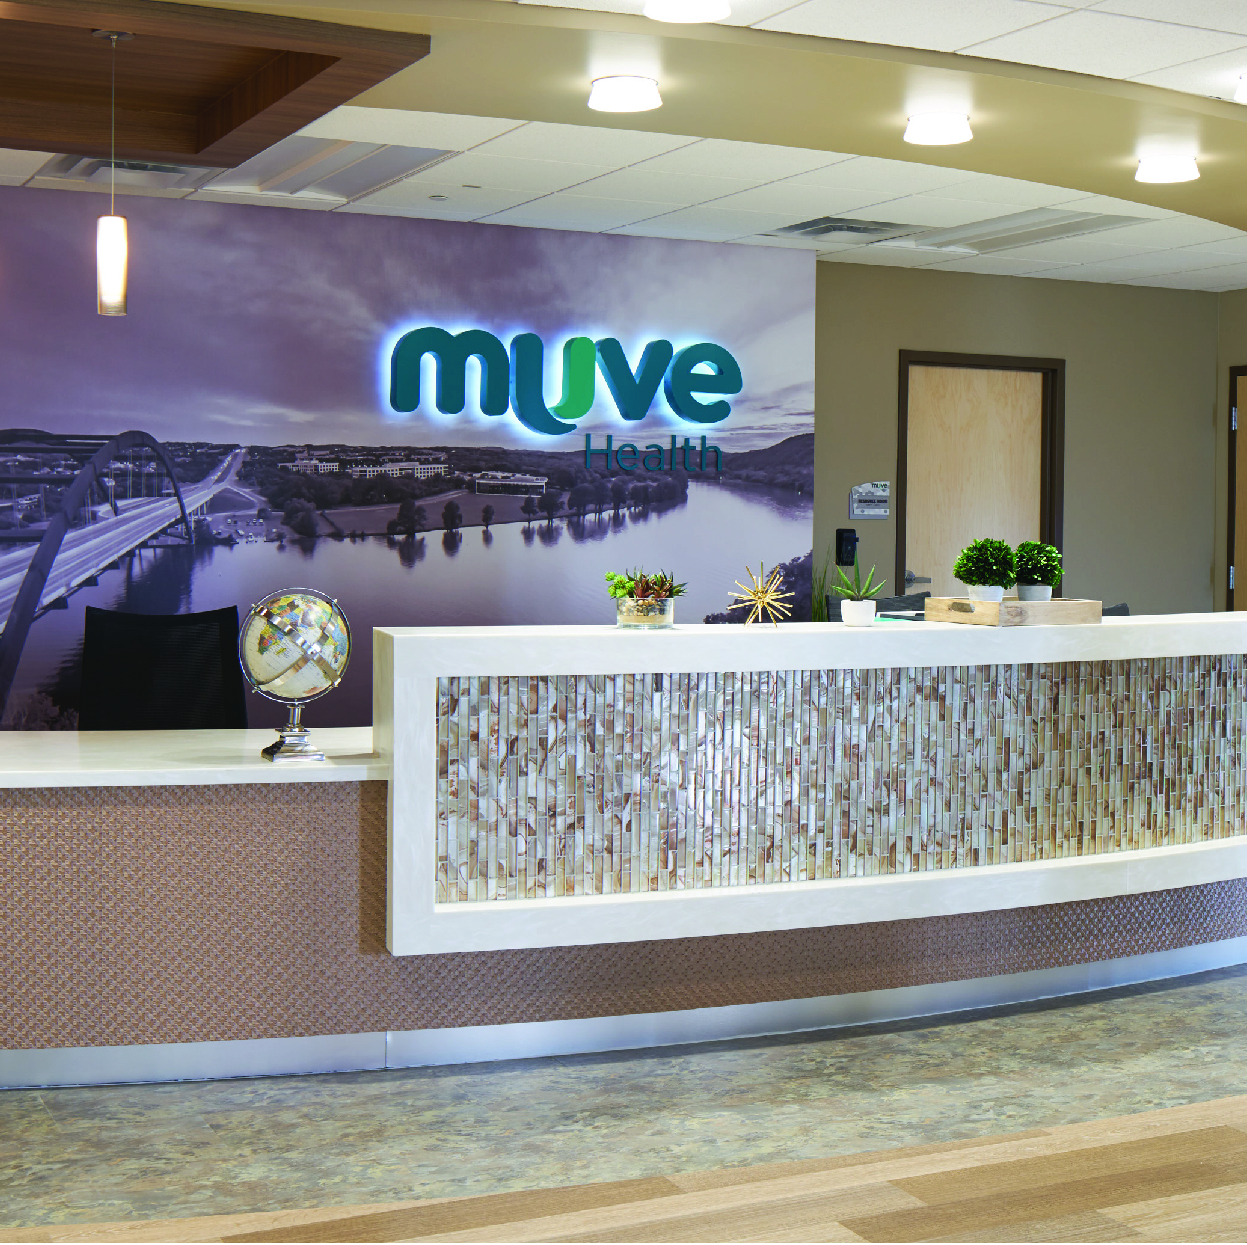 Muve Health, a ValueHealth Company, Receives Advanced Certification from Joint Commission for Muve Lakeway ASC, Becoming the First ASC in Texas to Receive this Certification